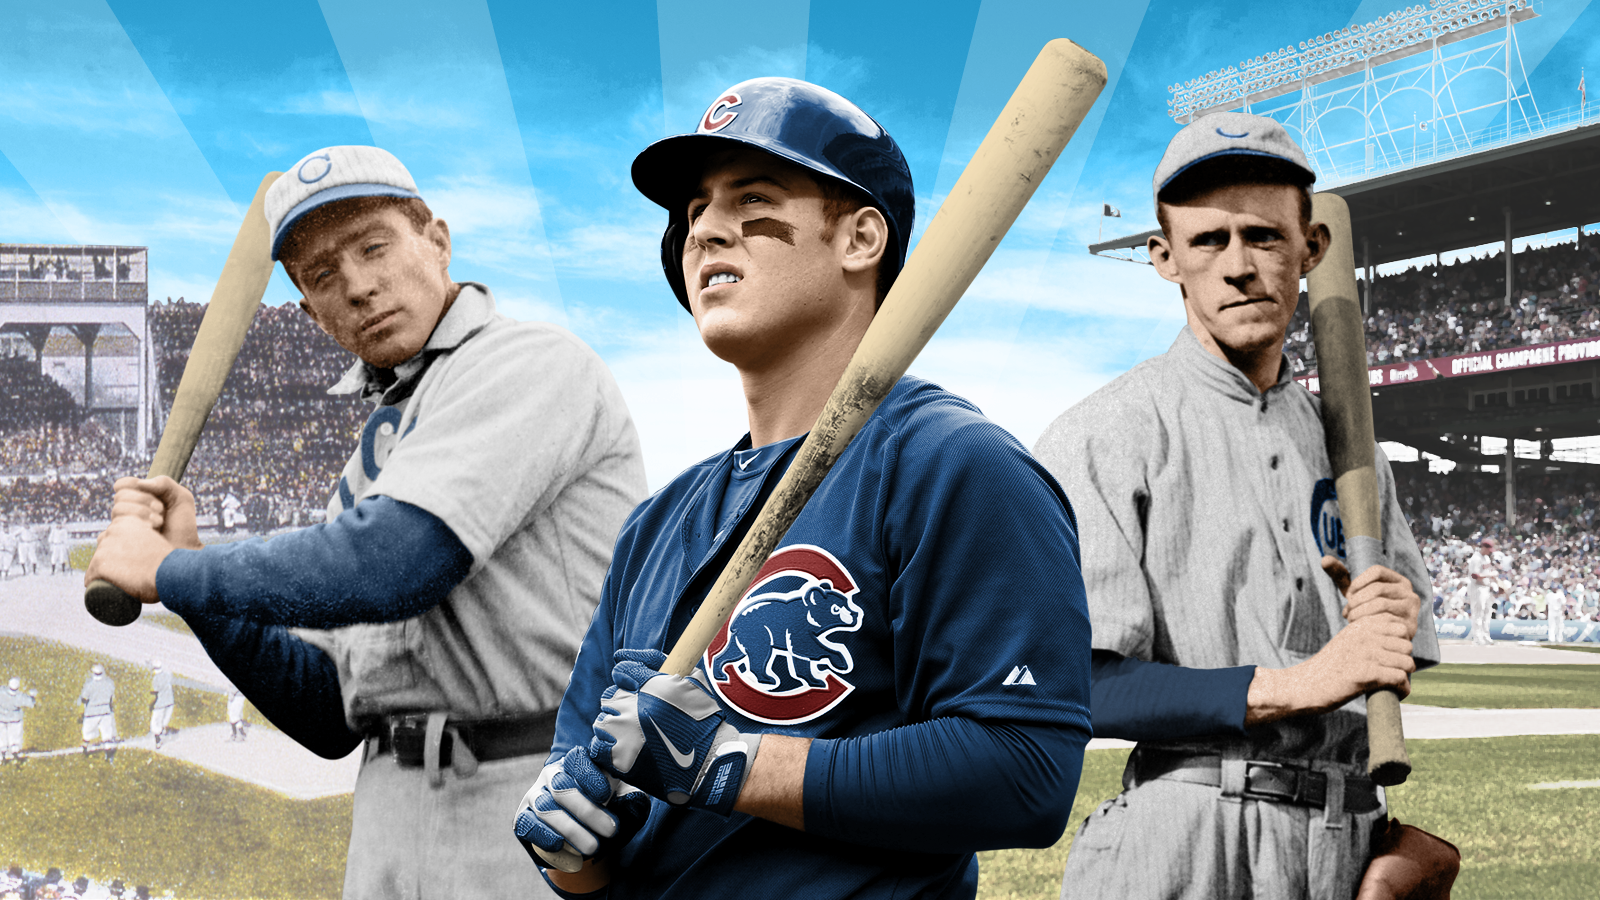 Chicago Cubs 1912 throwback uniforms.  Chicago cubs baseball, Cubs  baseball, Espn baseball